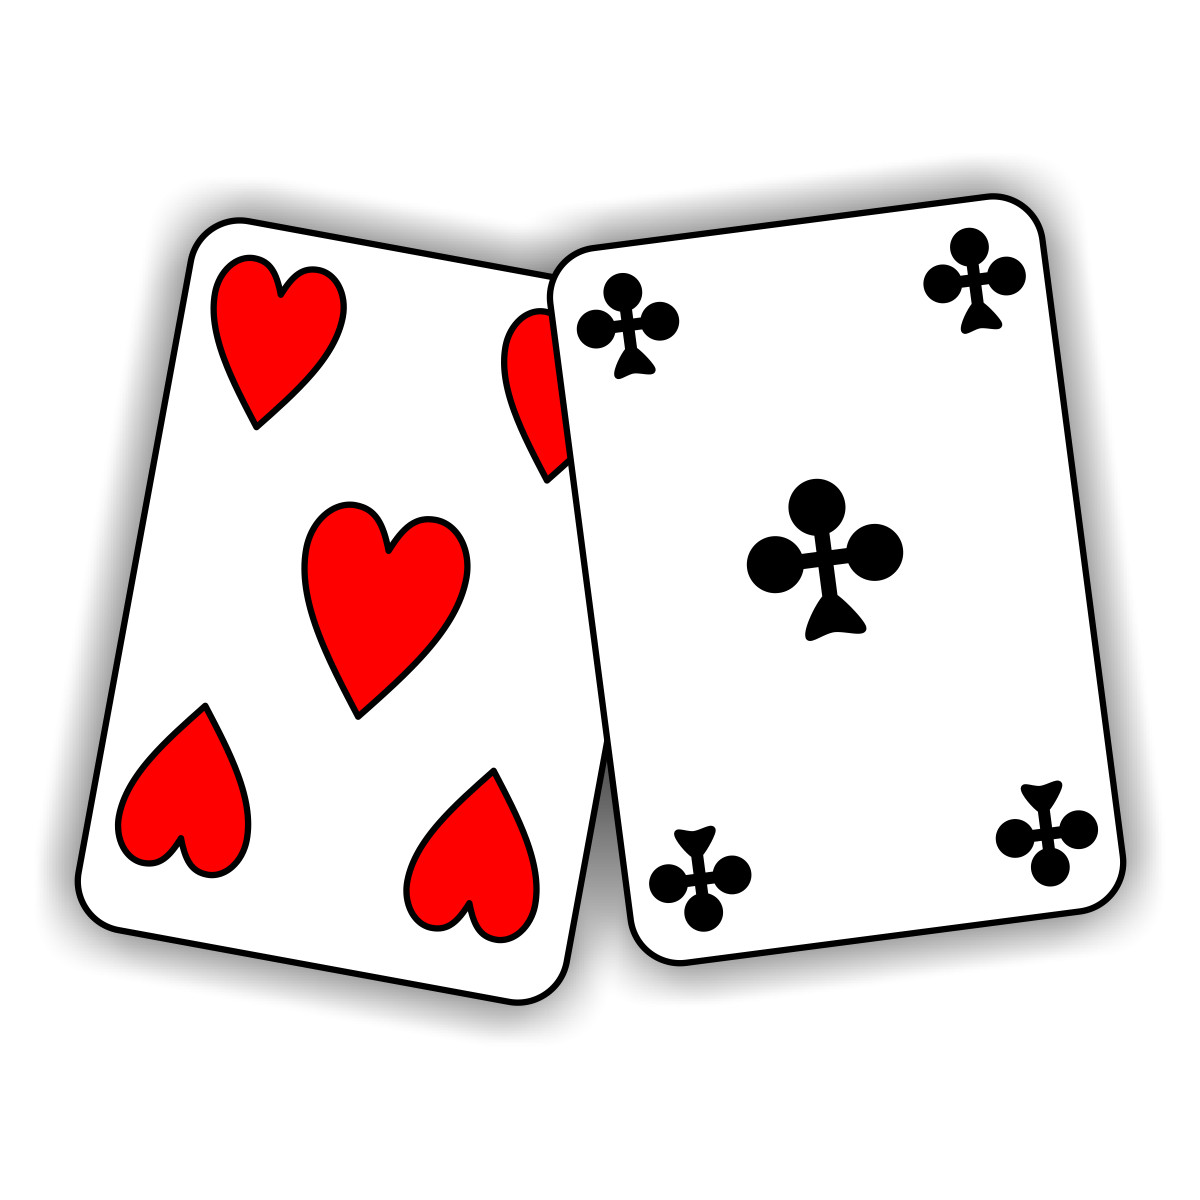 Free images of cards. Card clipart playing